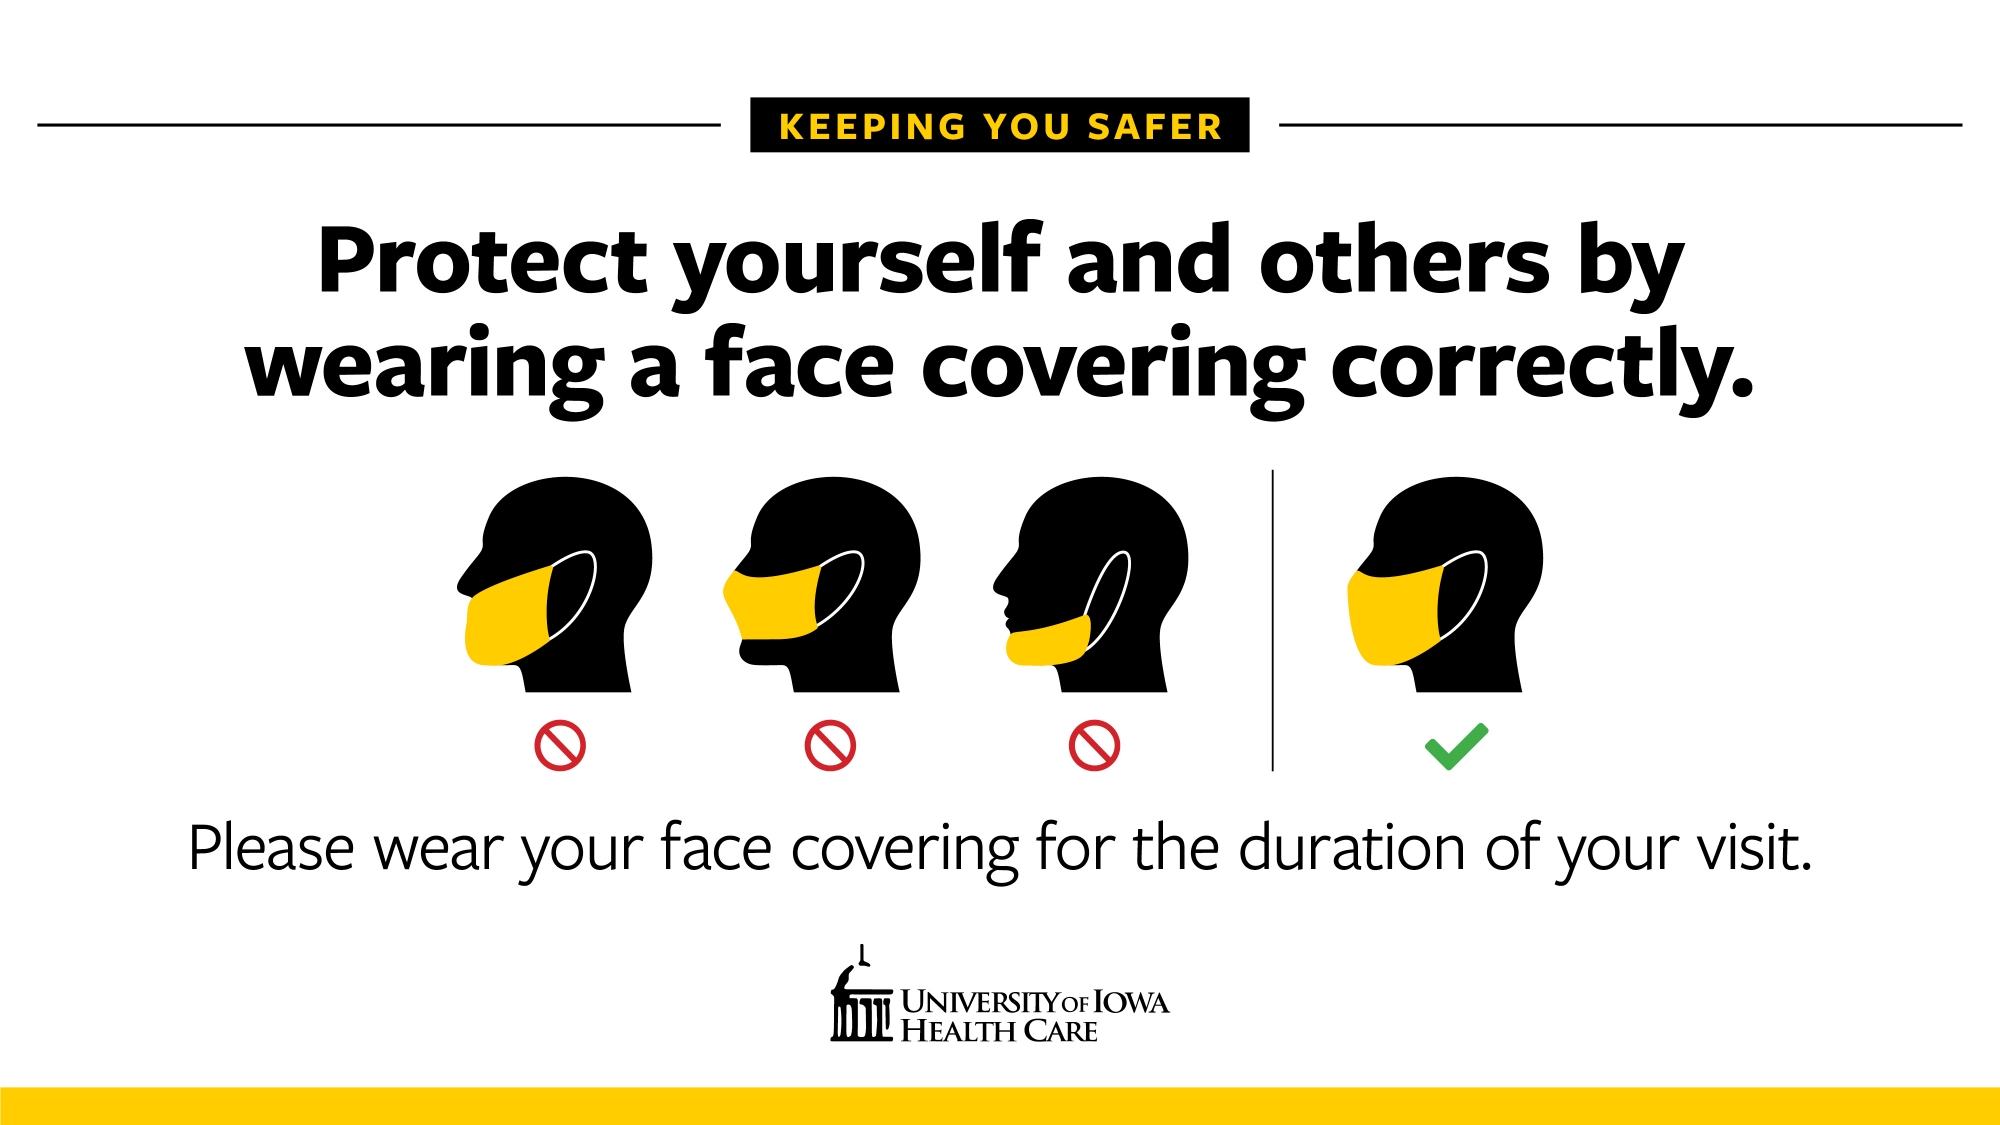 Protect yourself and others by wearing a face covering correctly.